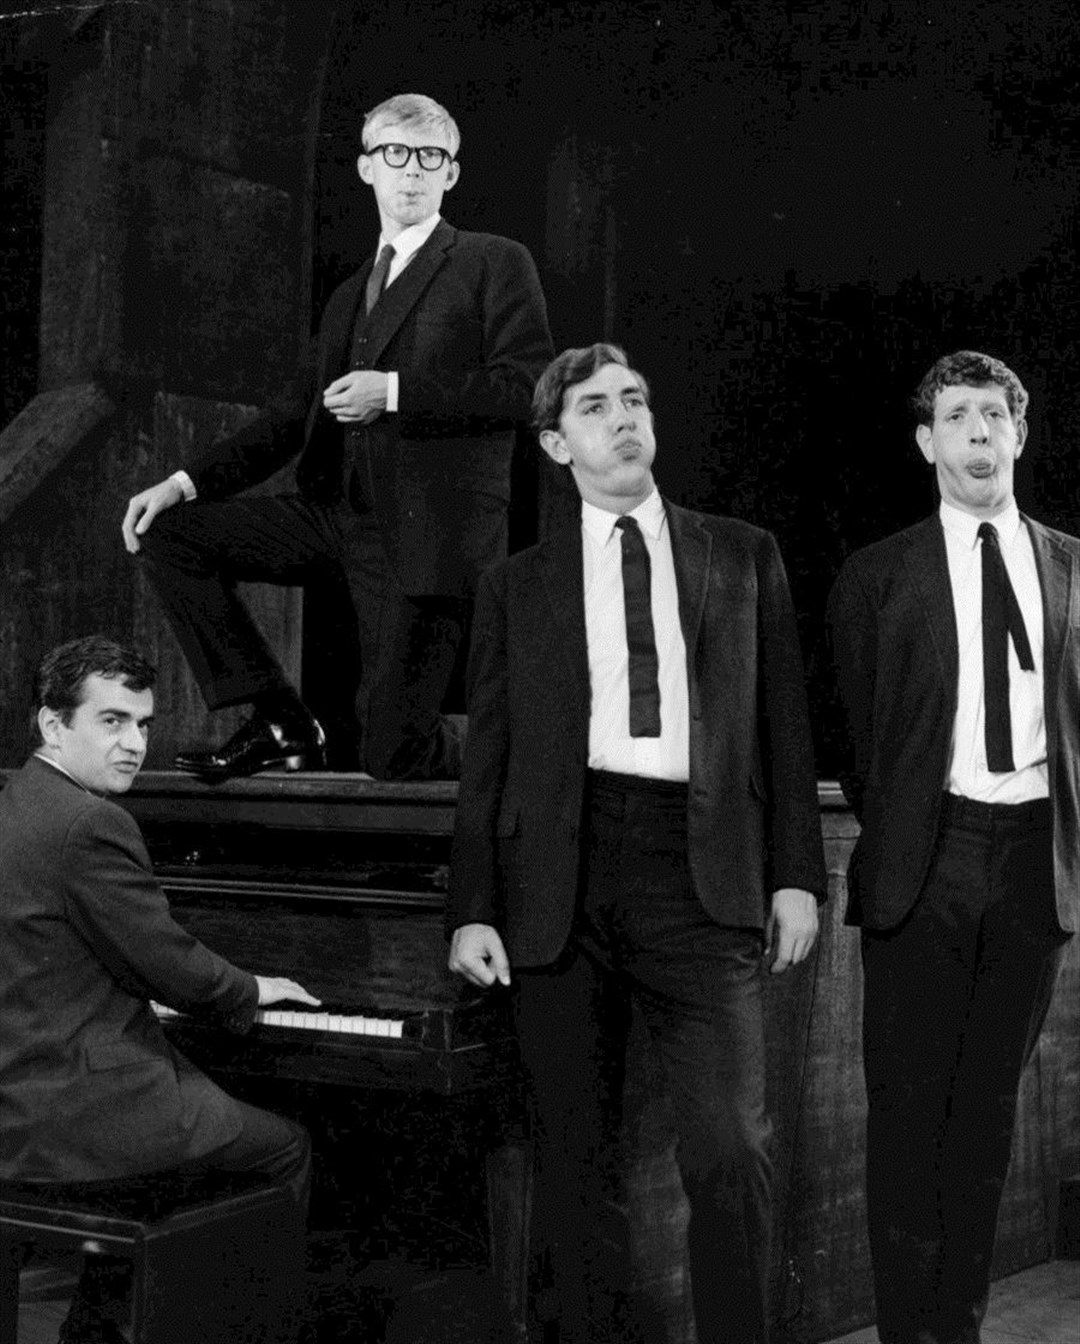 Jonathan Miller rose to fame with Beyond the Fringe, the show that launched the 1960s satire boom. He's pictured right, along with his fellow cast members Dudley Moore, Alan Bennett and Peter Cook